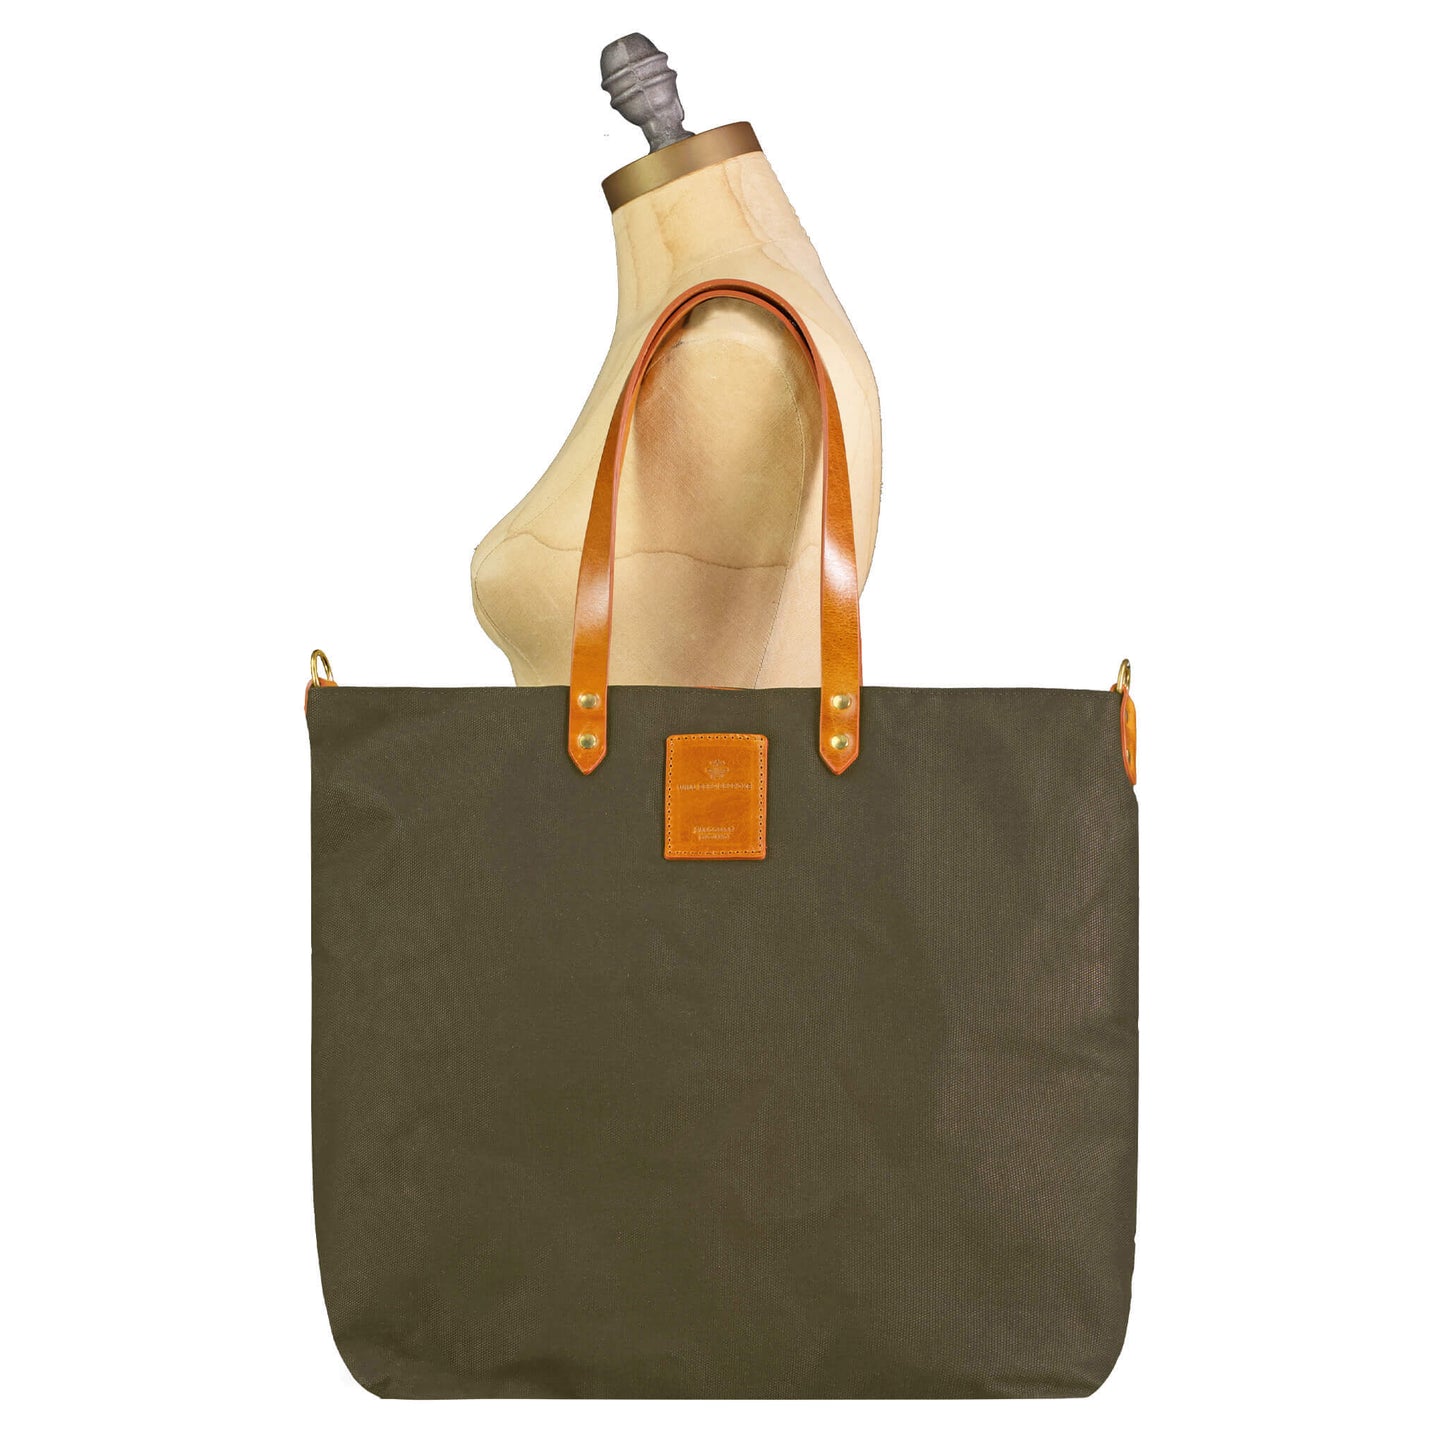 Canvas Tote - Olive - Will Bees Bespoke